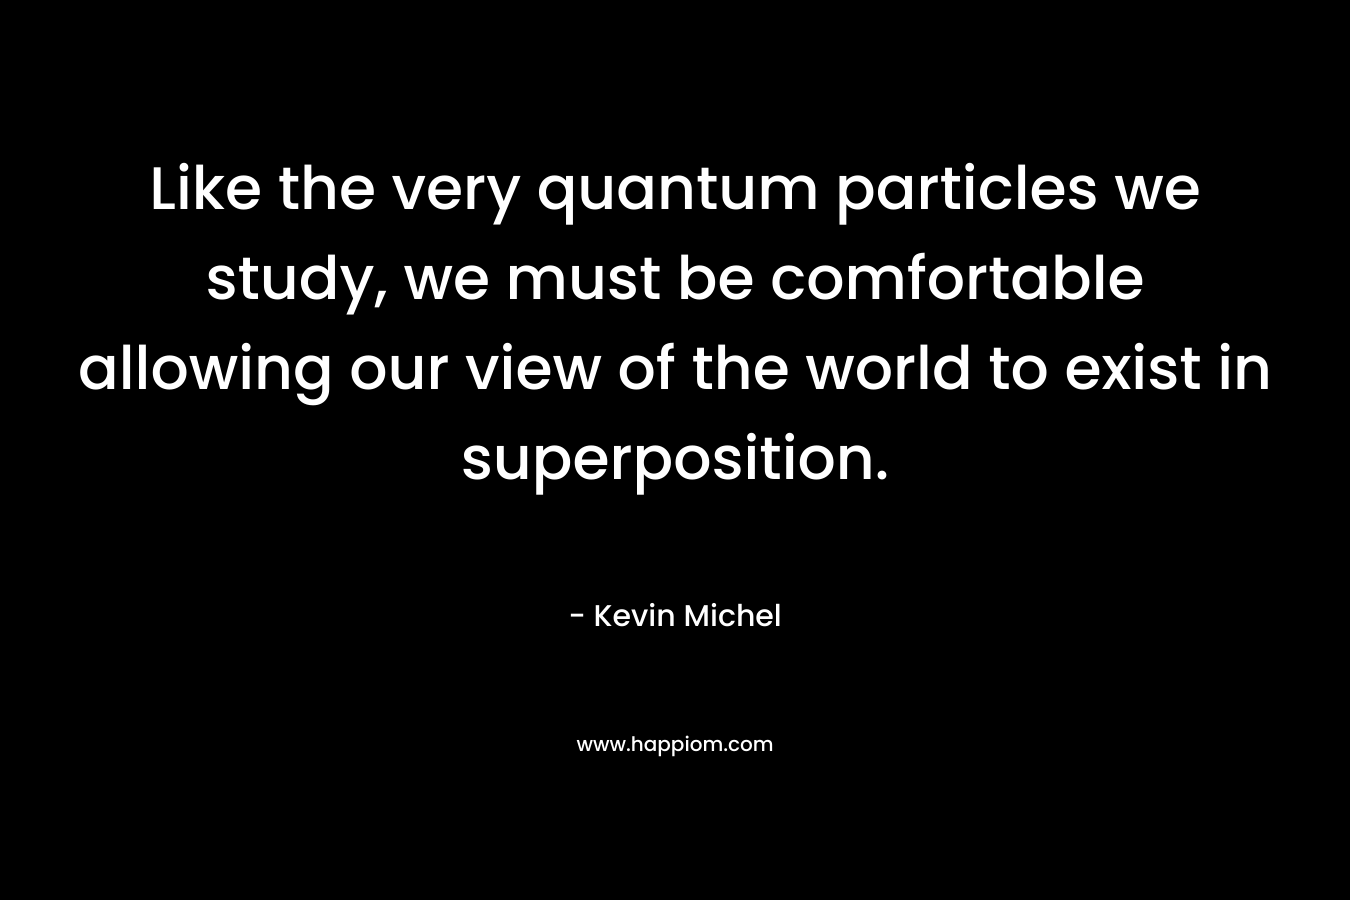 Like the very quantum particles we study, we must be comfortable allowing our view of the world to exist in superposition.